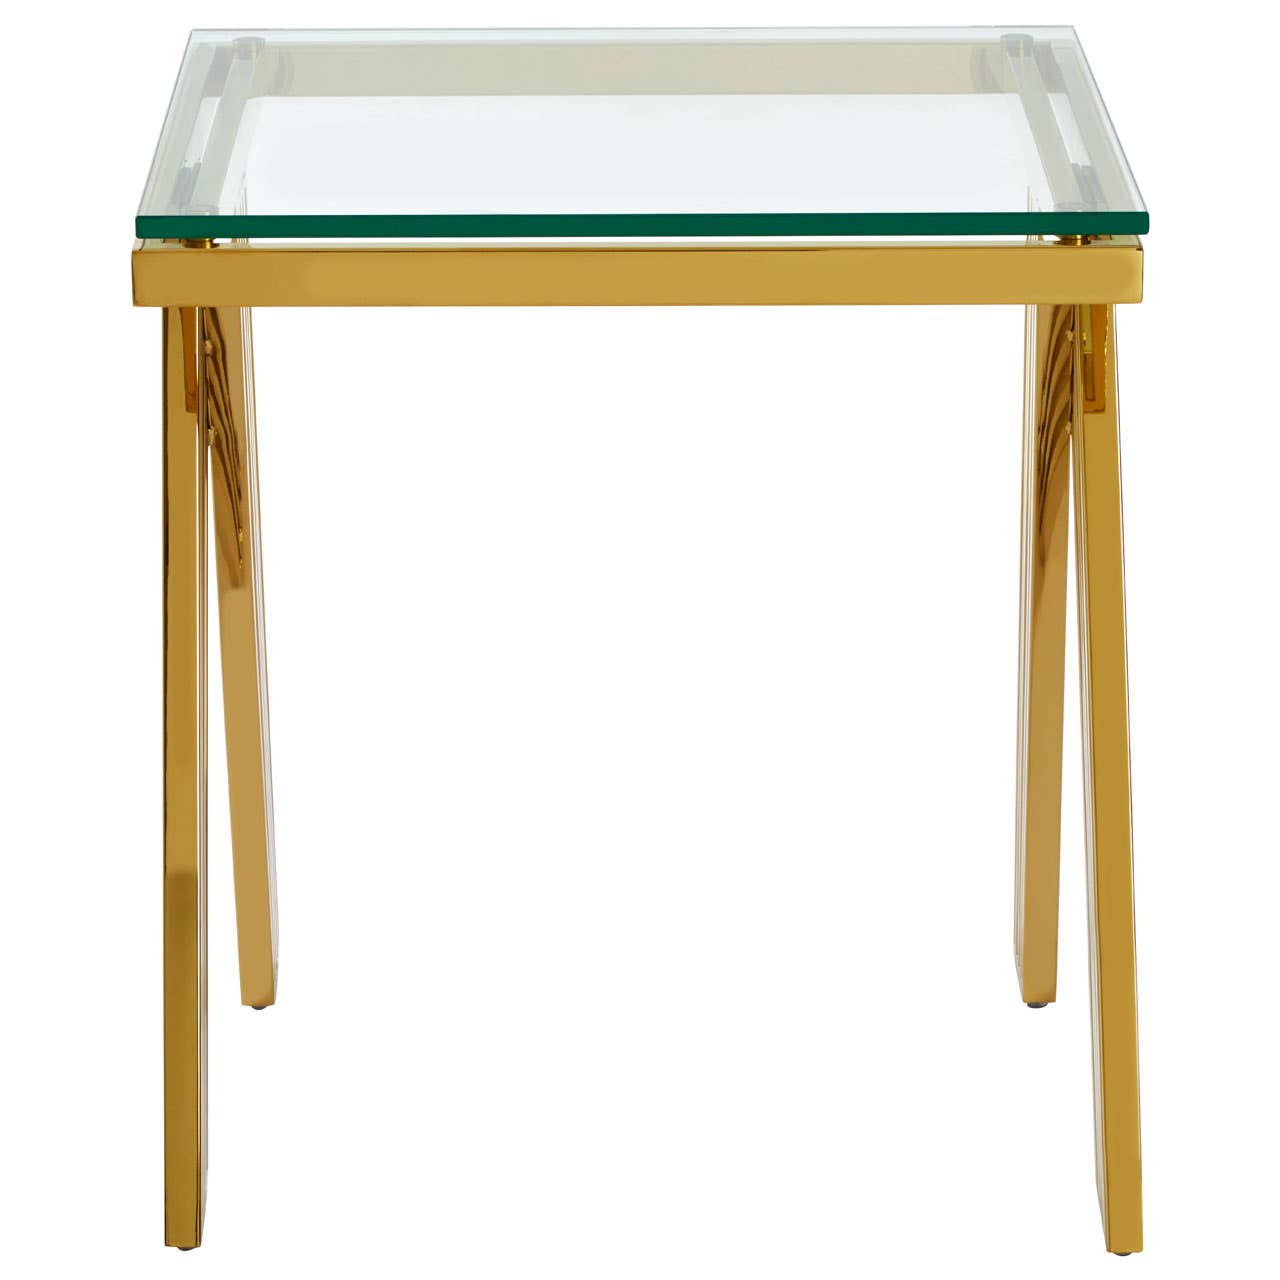 Piermount Gold Finish Side Table